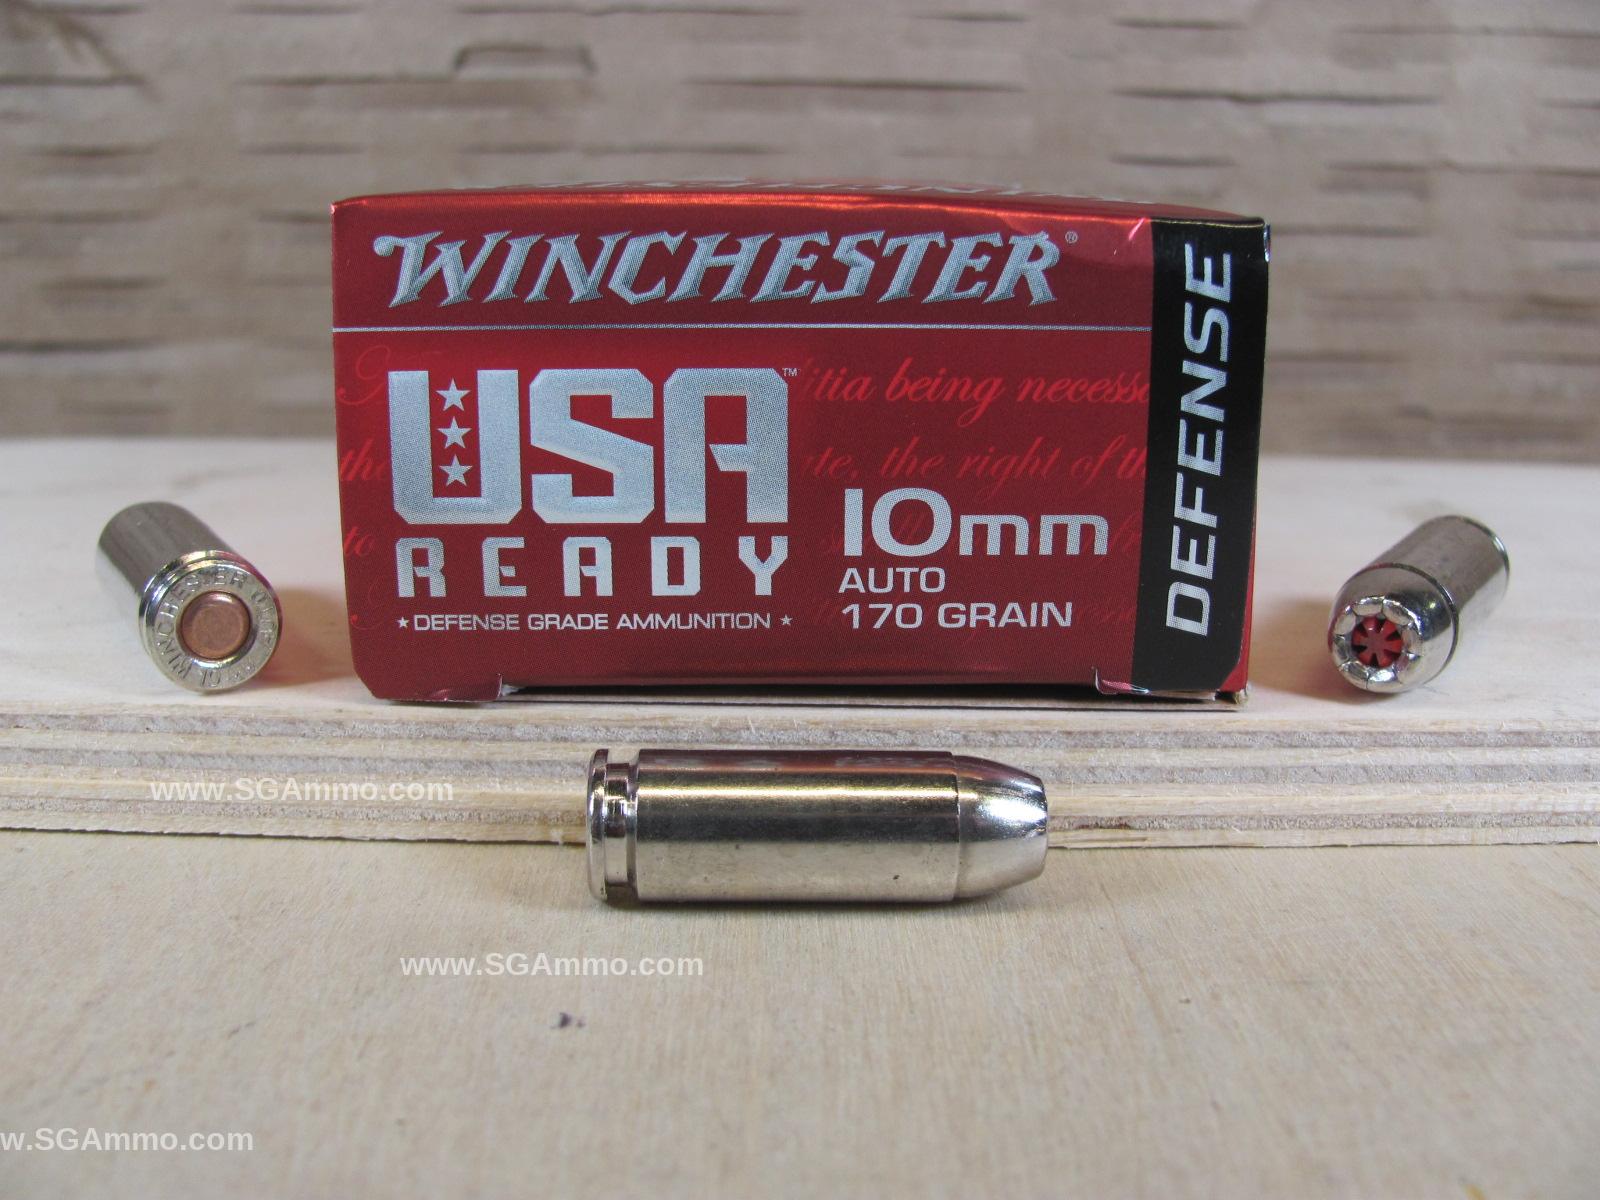 winchester-9mm-124-grain-fmj-ammo-500-rounds-199-99-free-s-h-code